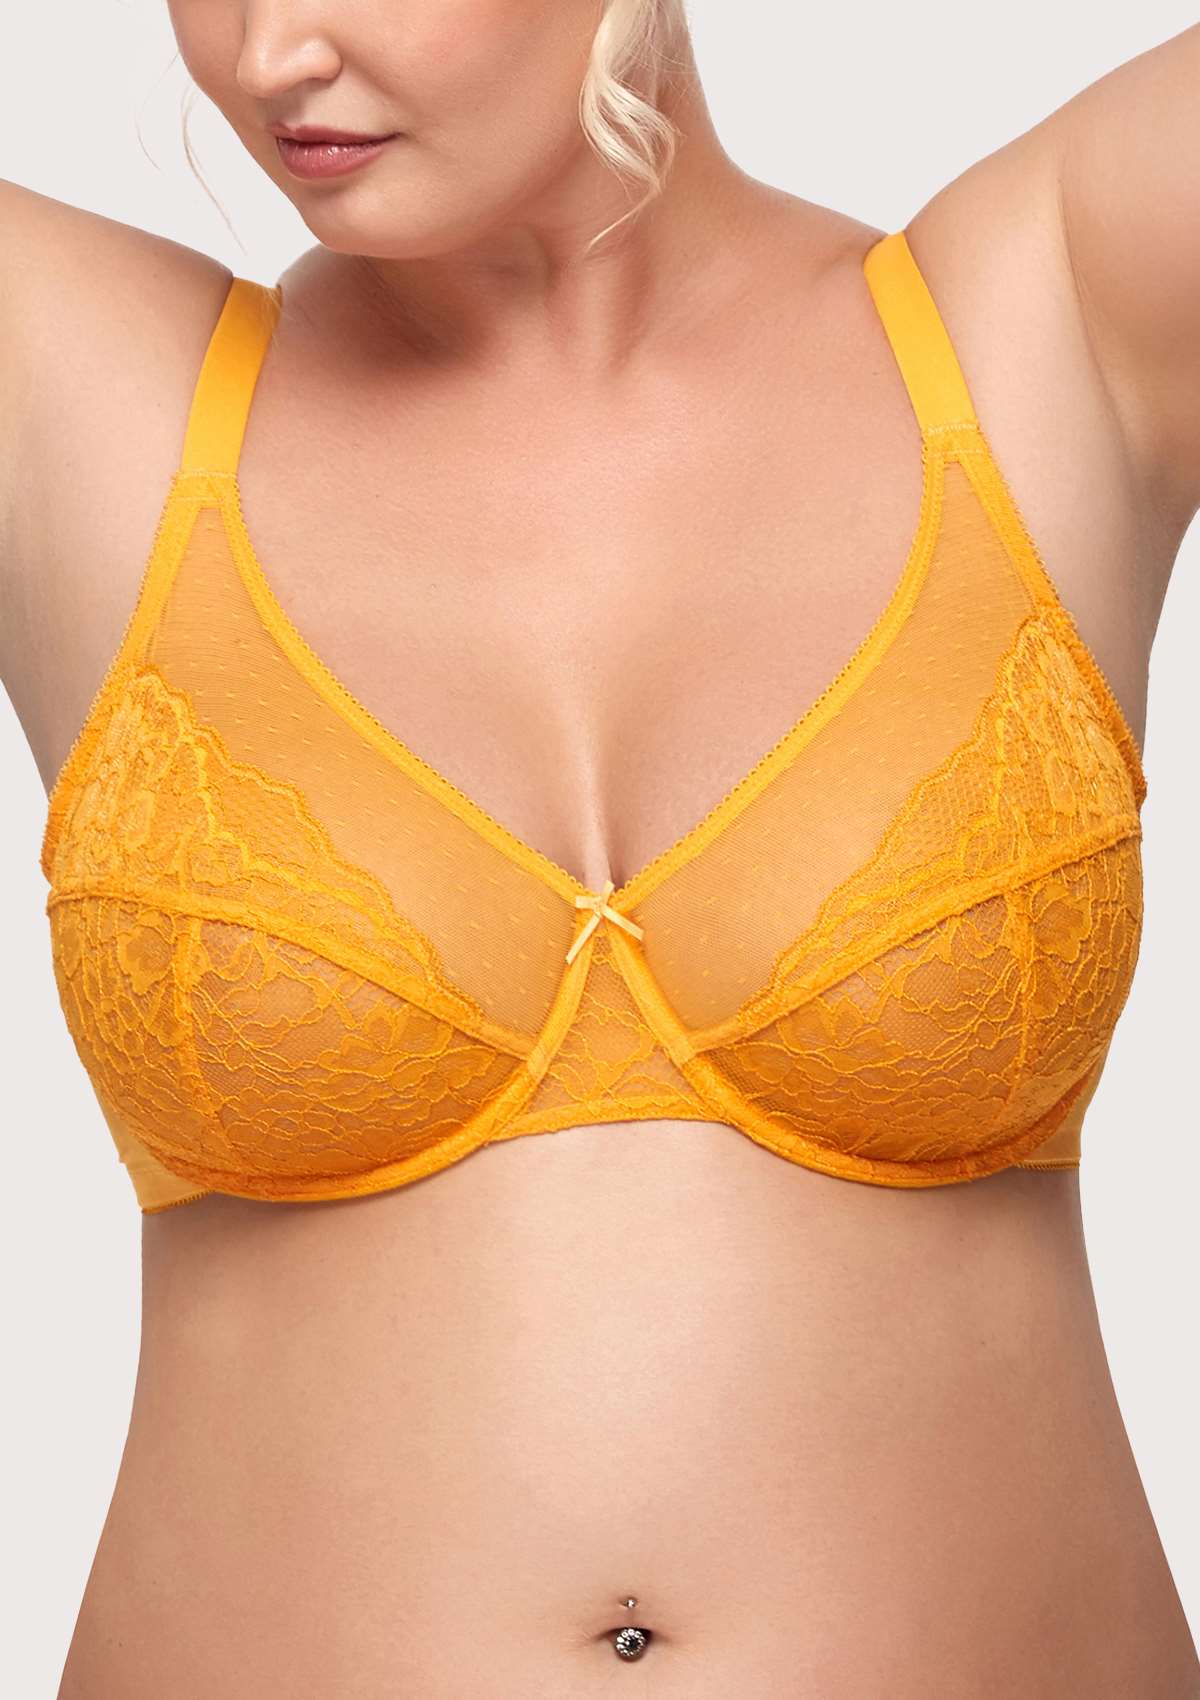 HSIA Enchante Bra And Panty Sets: Unpadded Bra With Back Support - Cadmium Yellow / 38 / G